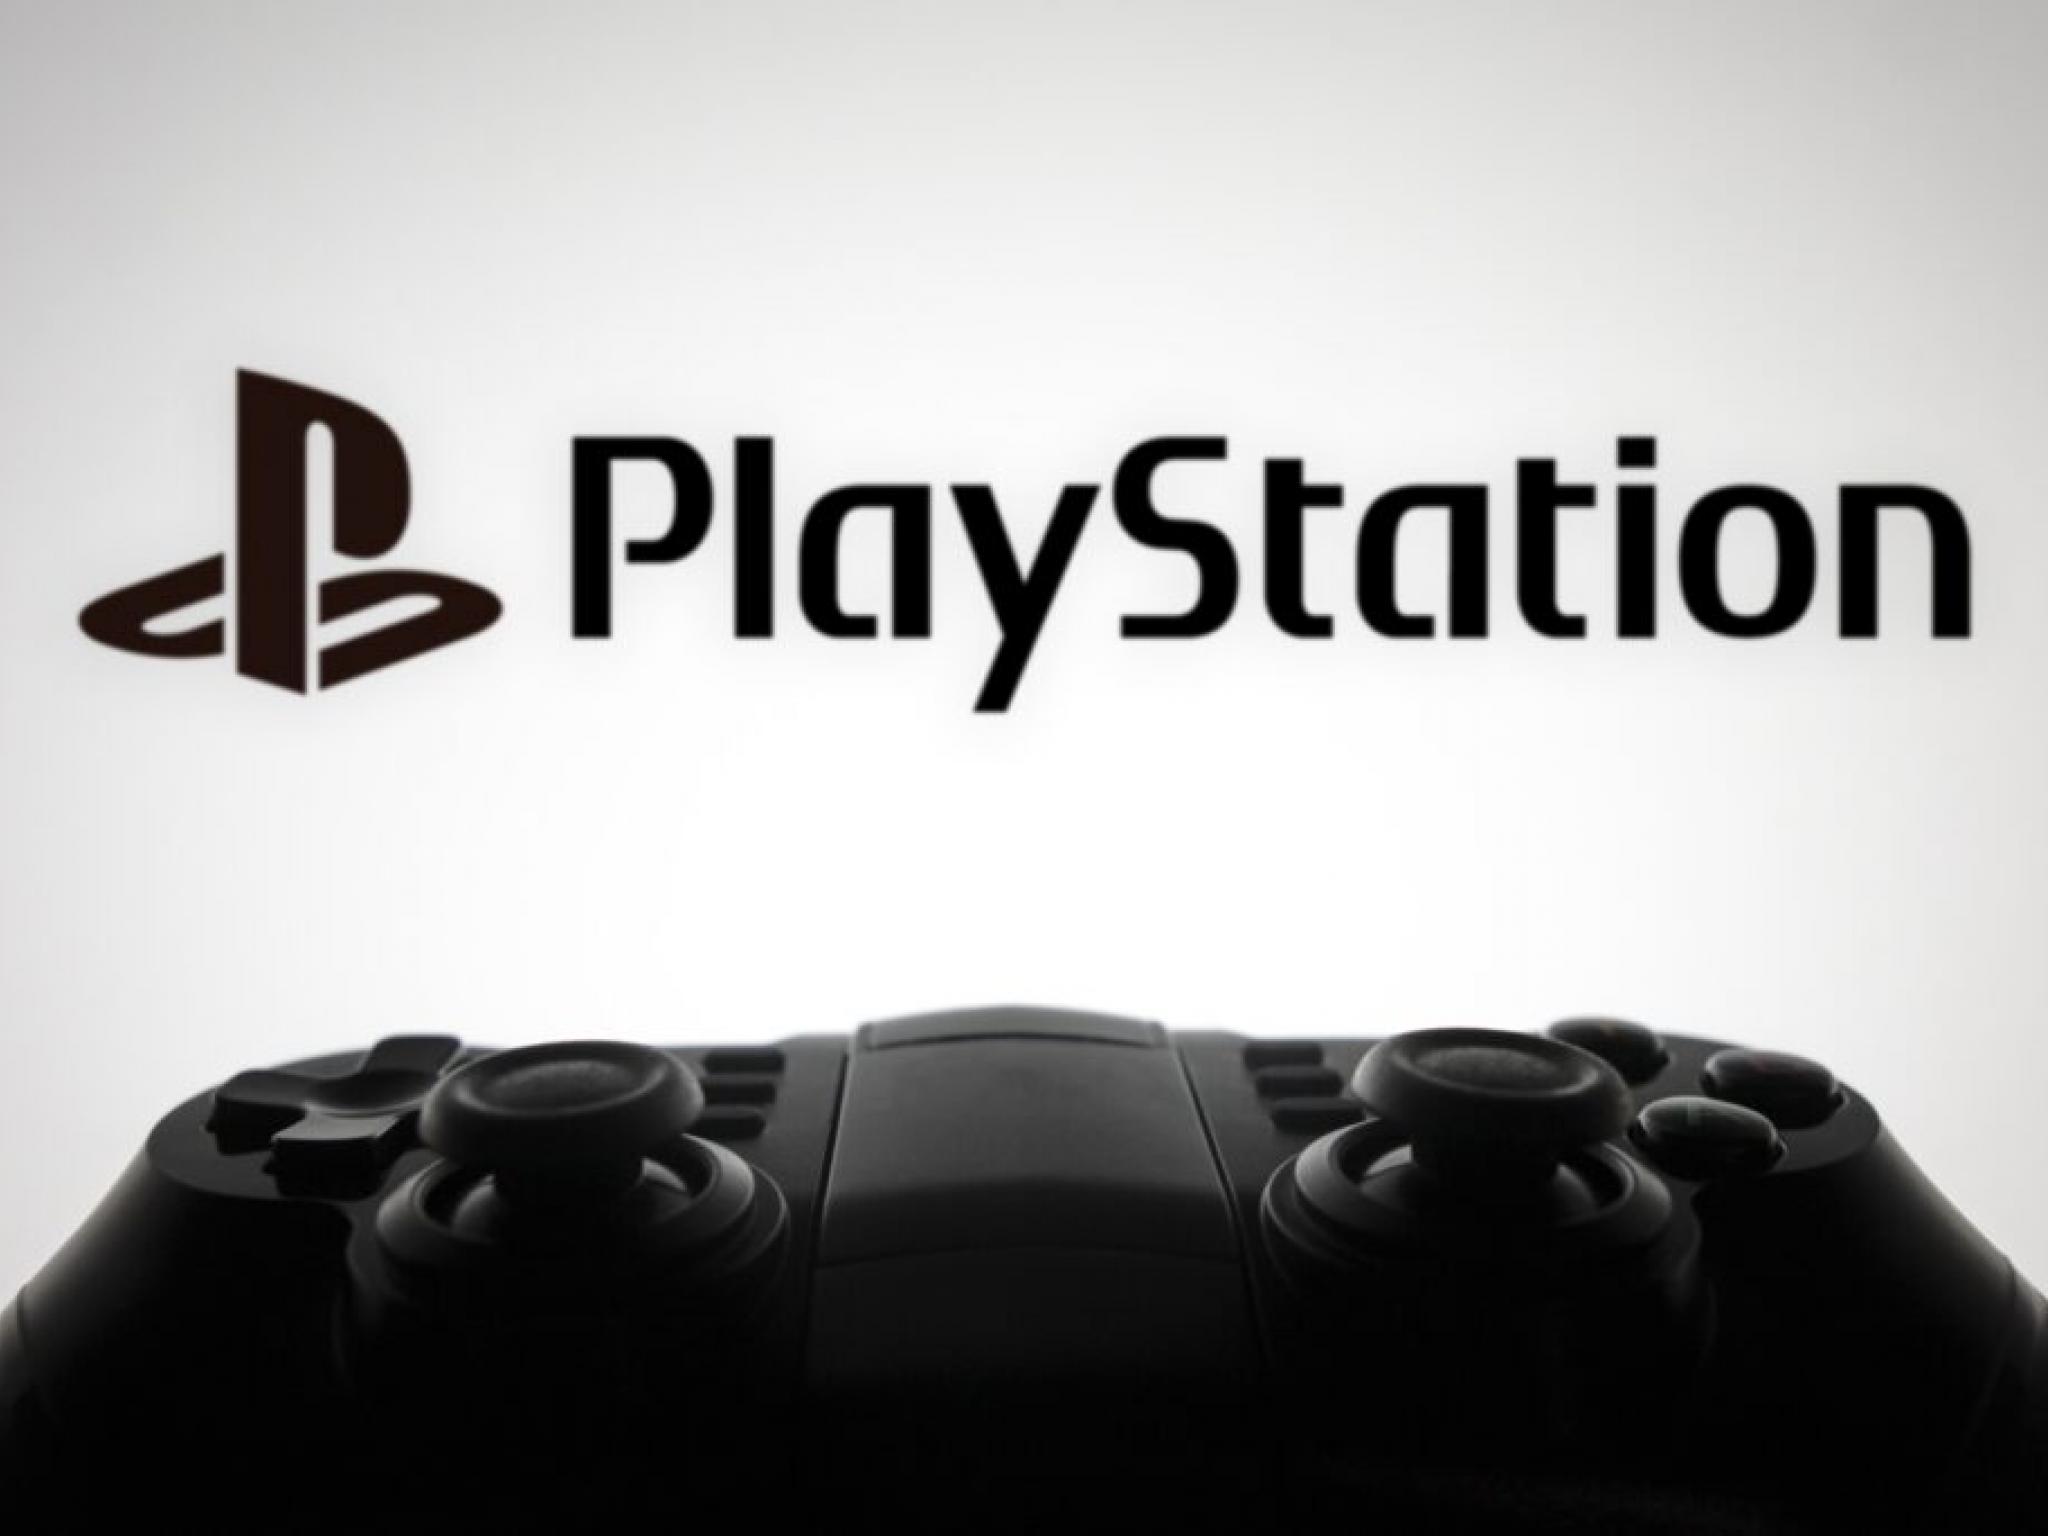  design-your-own-controller-playstations-latest-patent-explained 